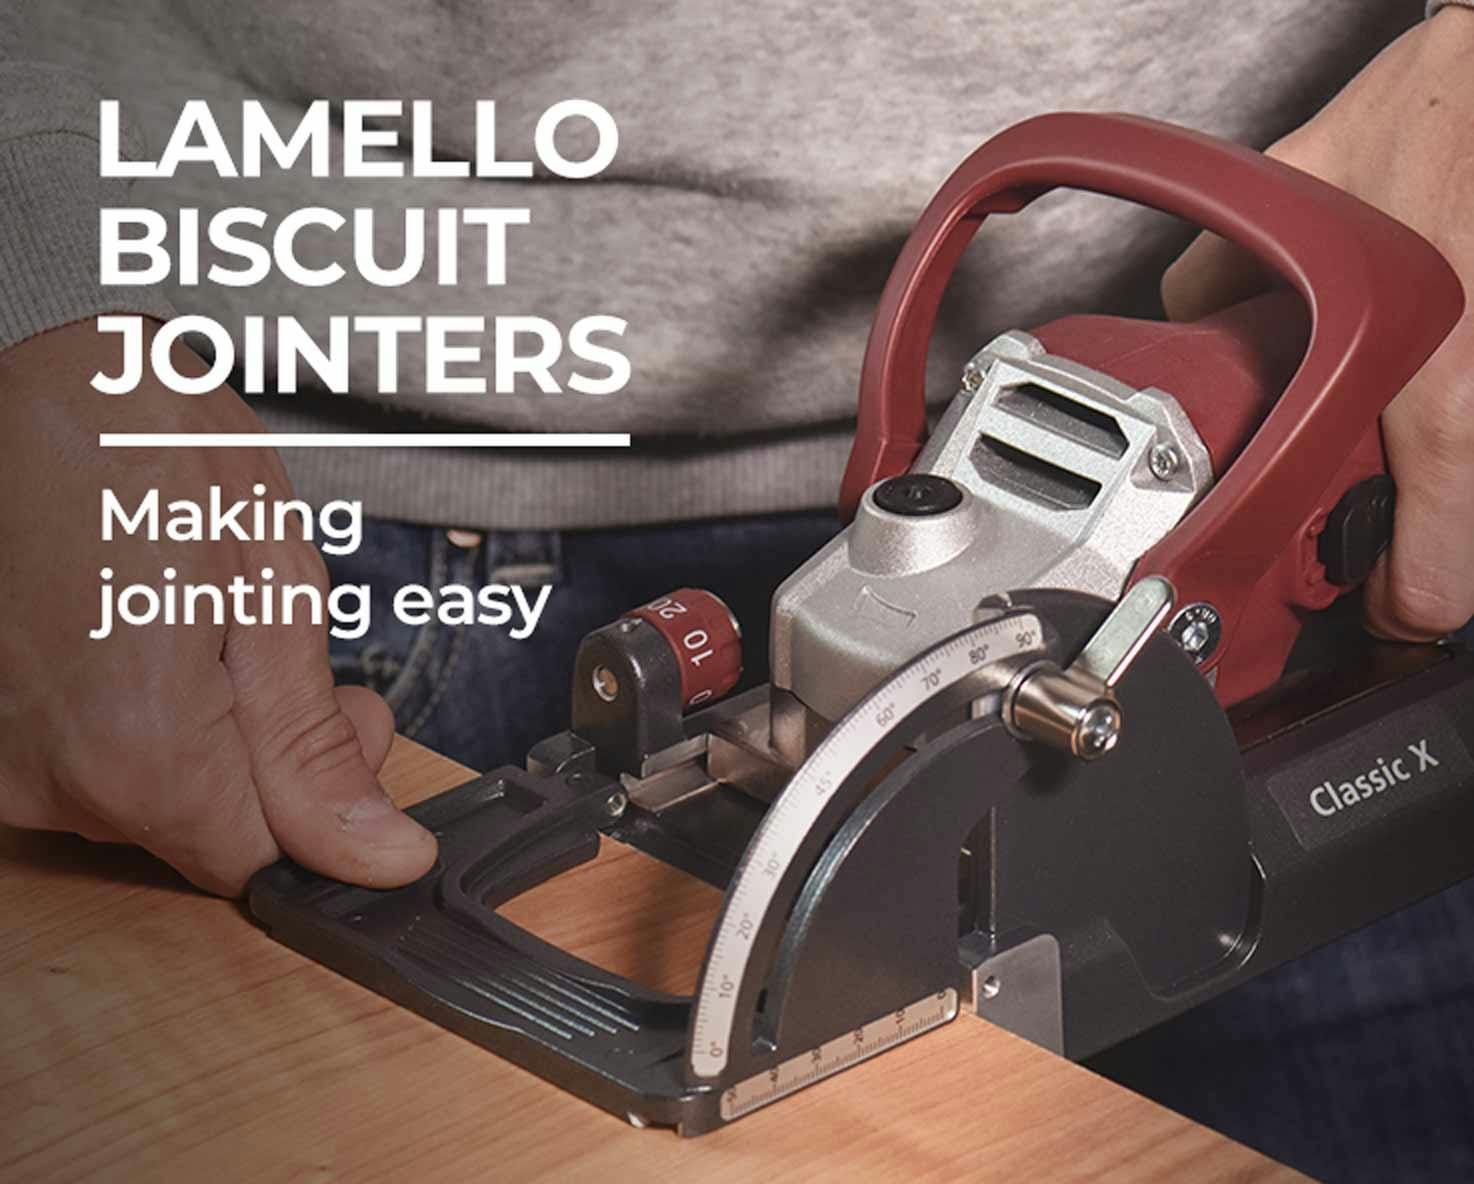 Lamello Biscuit Jointer